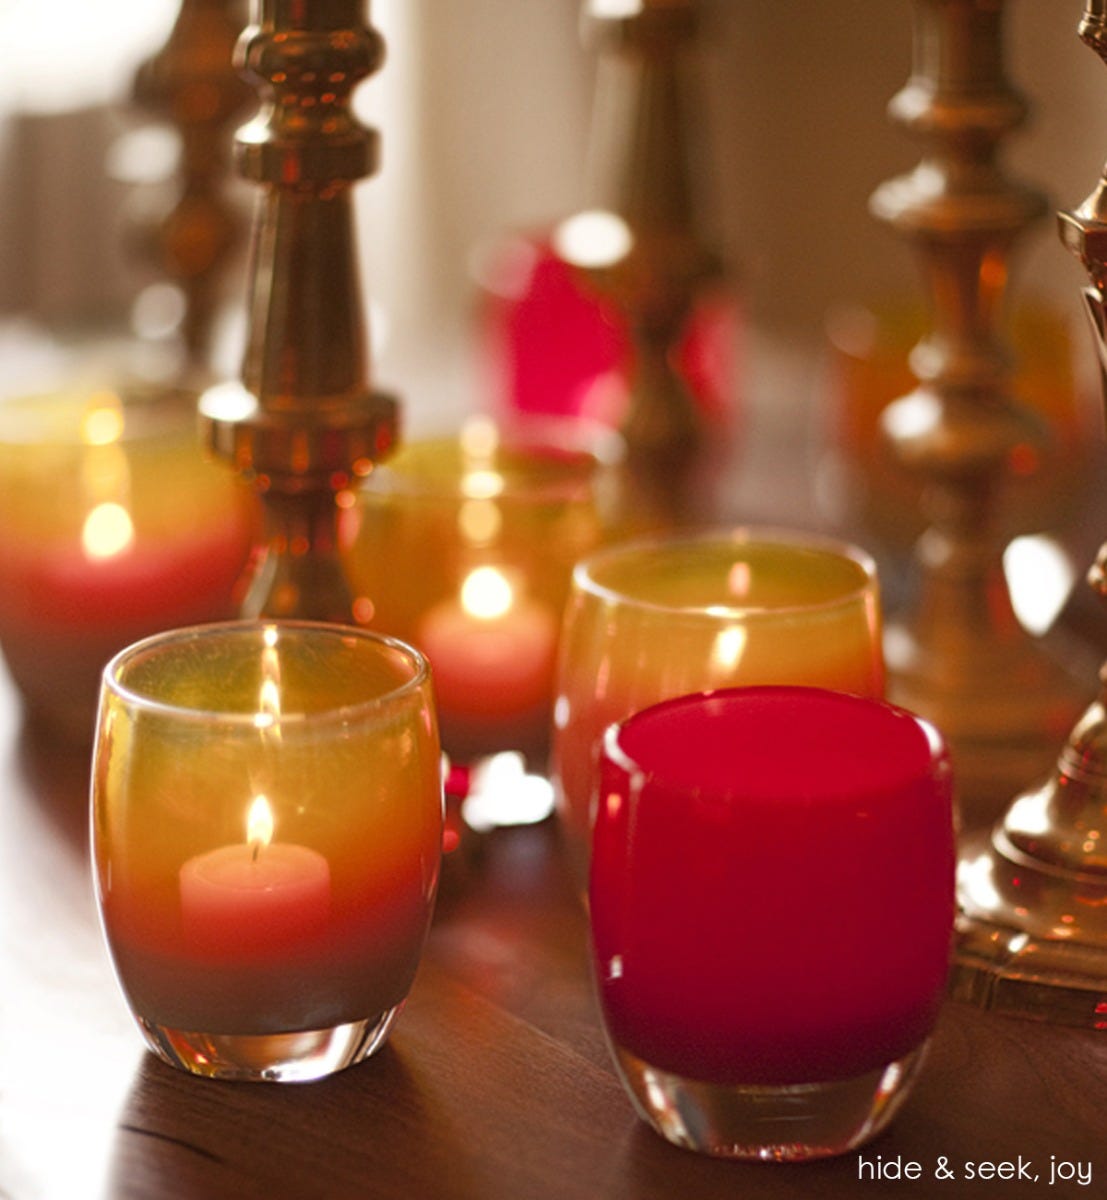 joy crimson red hand-blown glass votive candle holder. Paired with hide and seek.